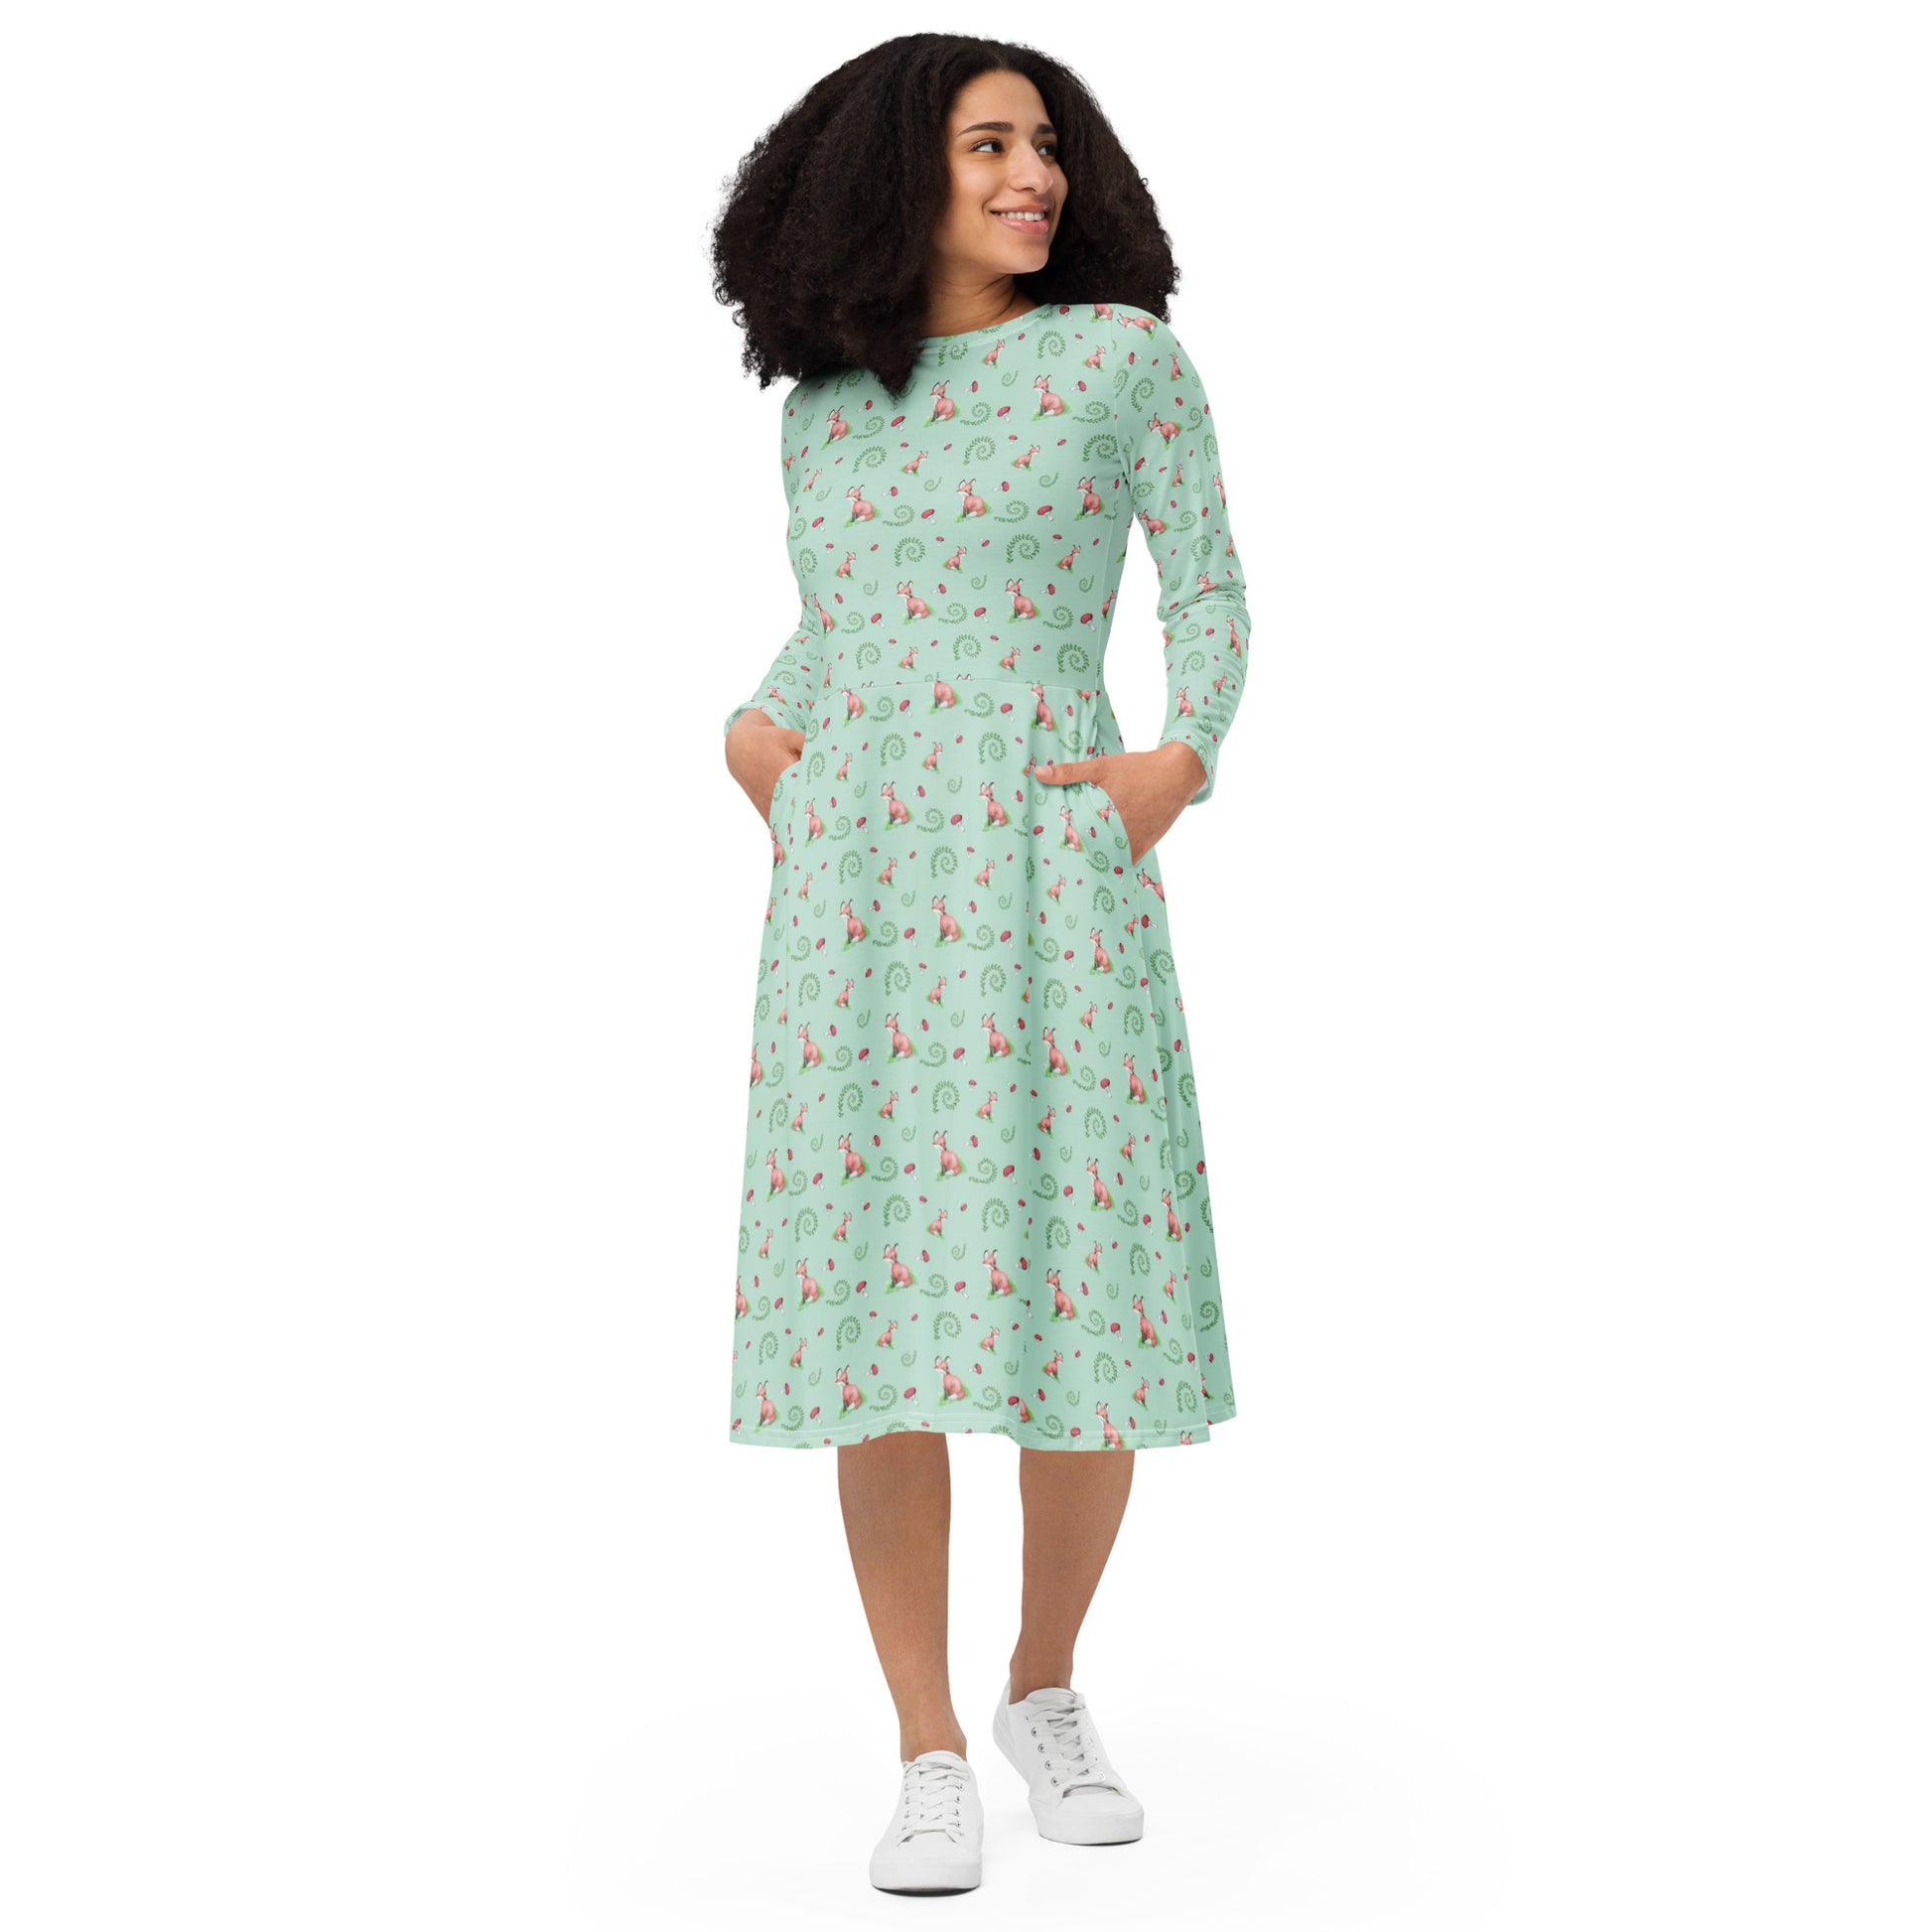 Forest fox patterned long sleeve midi dress with side pockets. Has watercolor foxes, mushrooms, and ferns on a light green fabric. Features boat neckline and fitted elastic waist. Shown on female model.